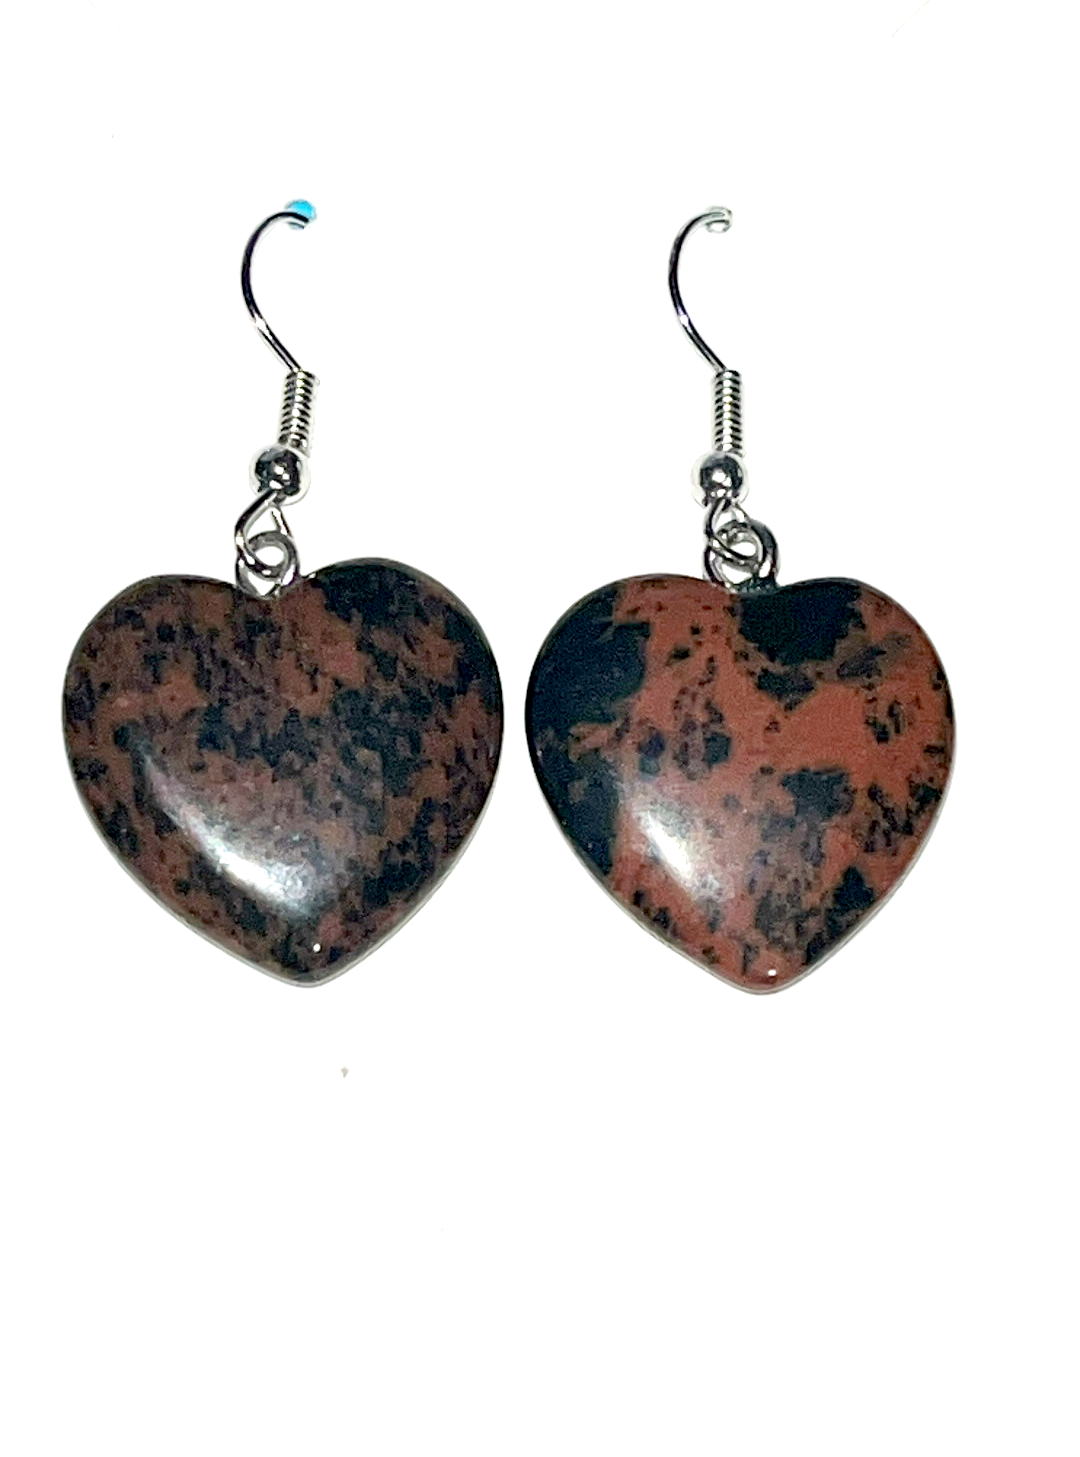 Mini crystal heart dangle hook earrings in Carnelian, Blue Sandstone, Picture Stone, and Mahogany Obsidian. 0.75 x 0.75 inches.